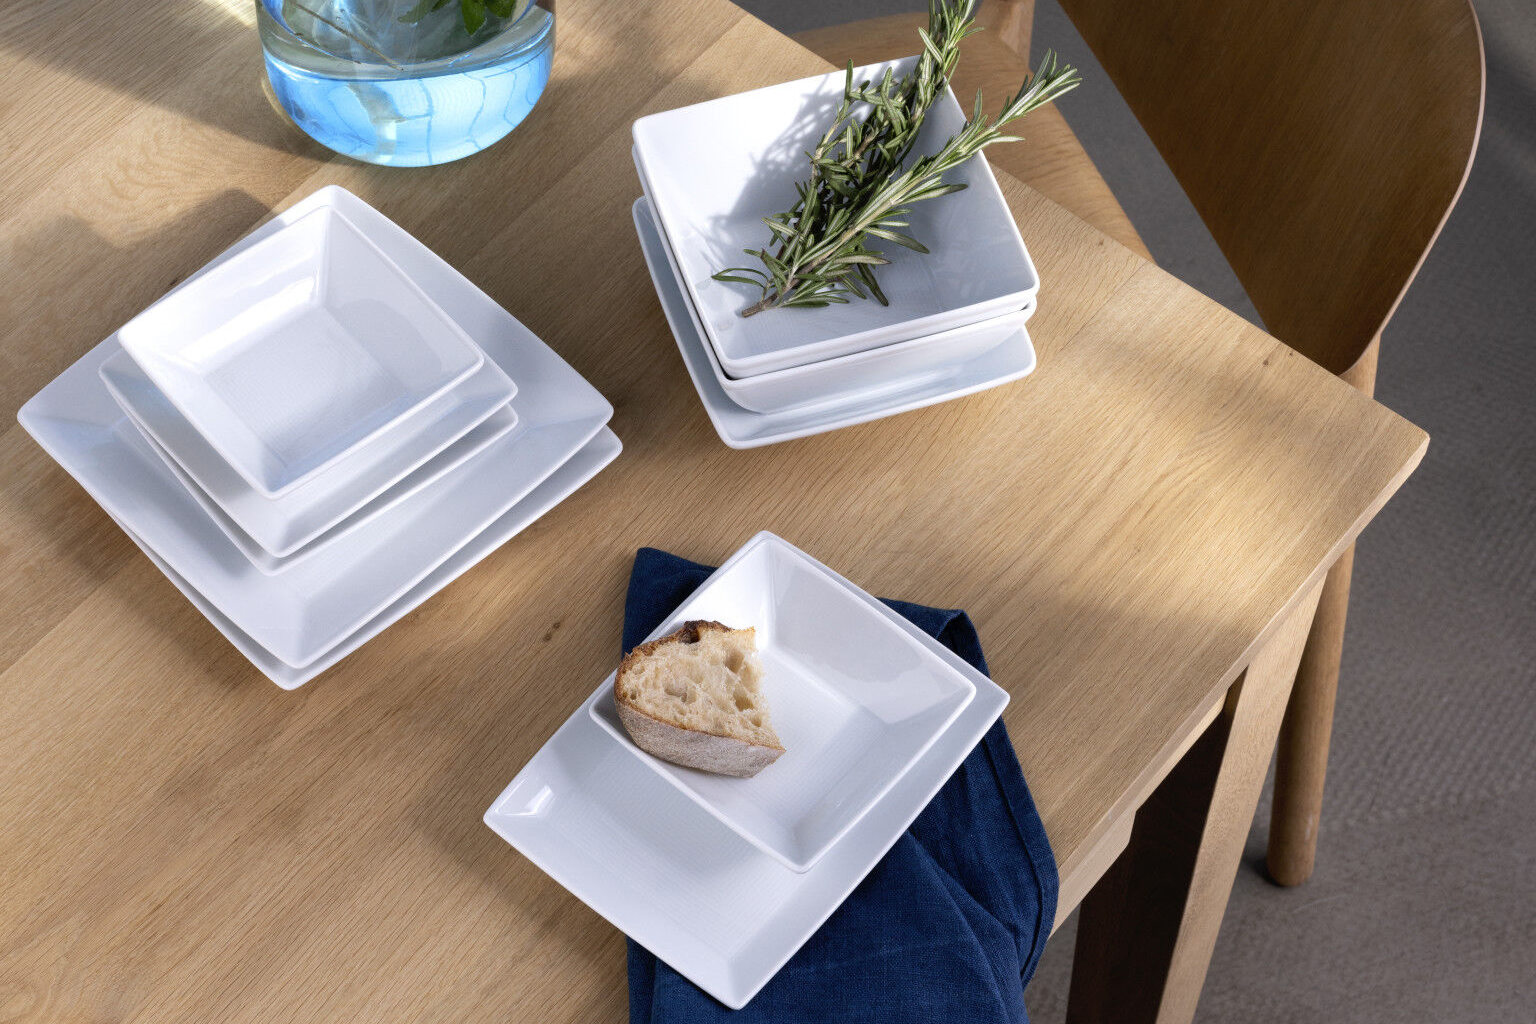 Thomas Loft White square-shaped platters stacked into each other